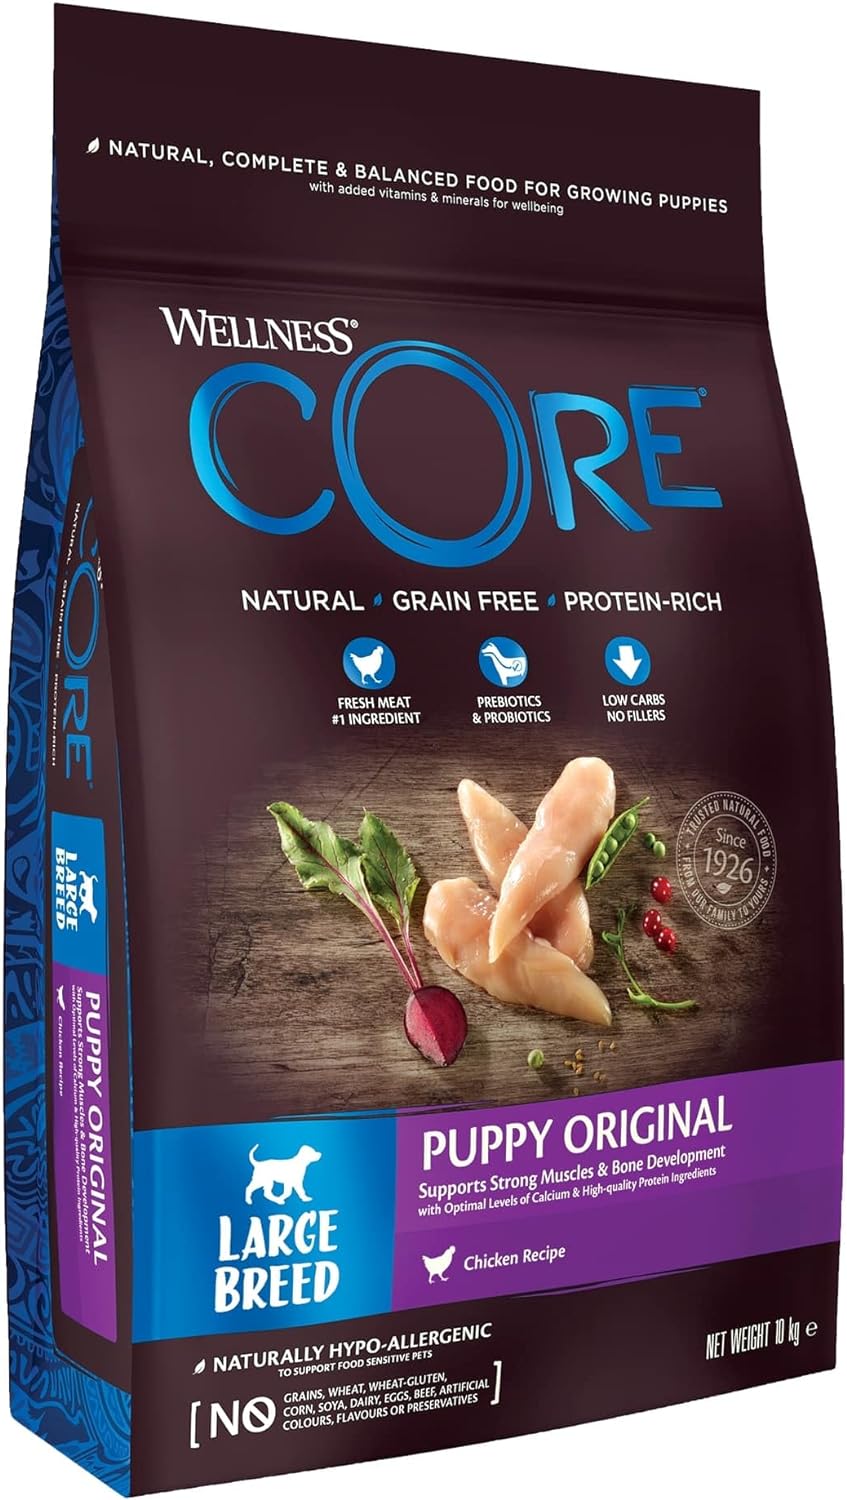 Wellness CORE Large Breed Puppy Original, Dry Puppy Food for Large Breed Puppies, Grain Free, High Meat Content, Chicken, 10 kg?10789